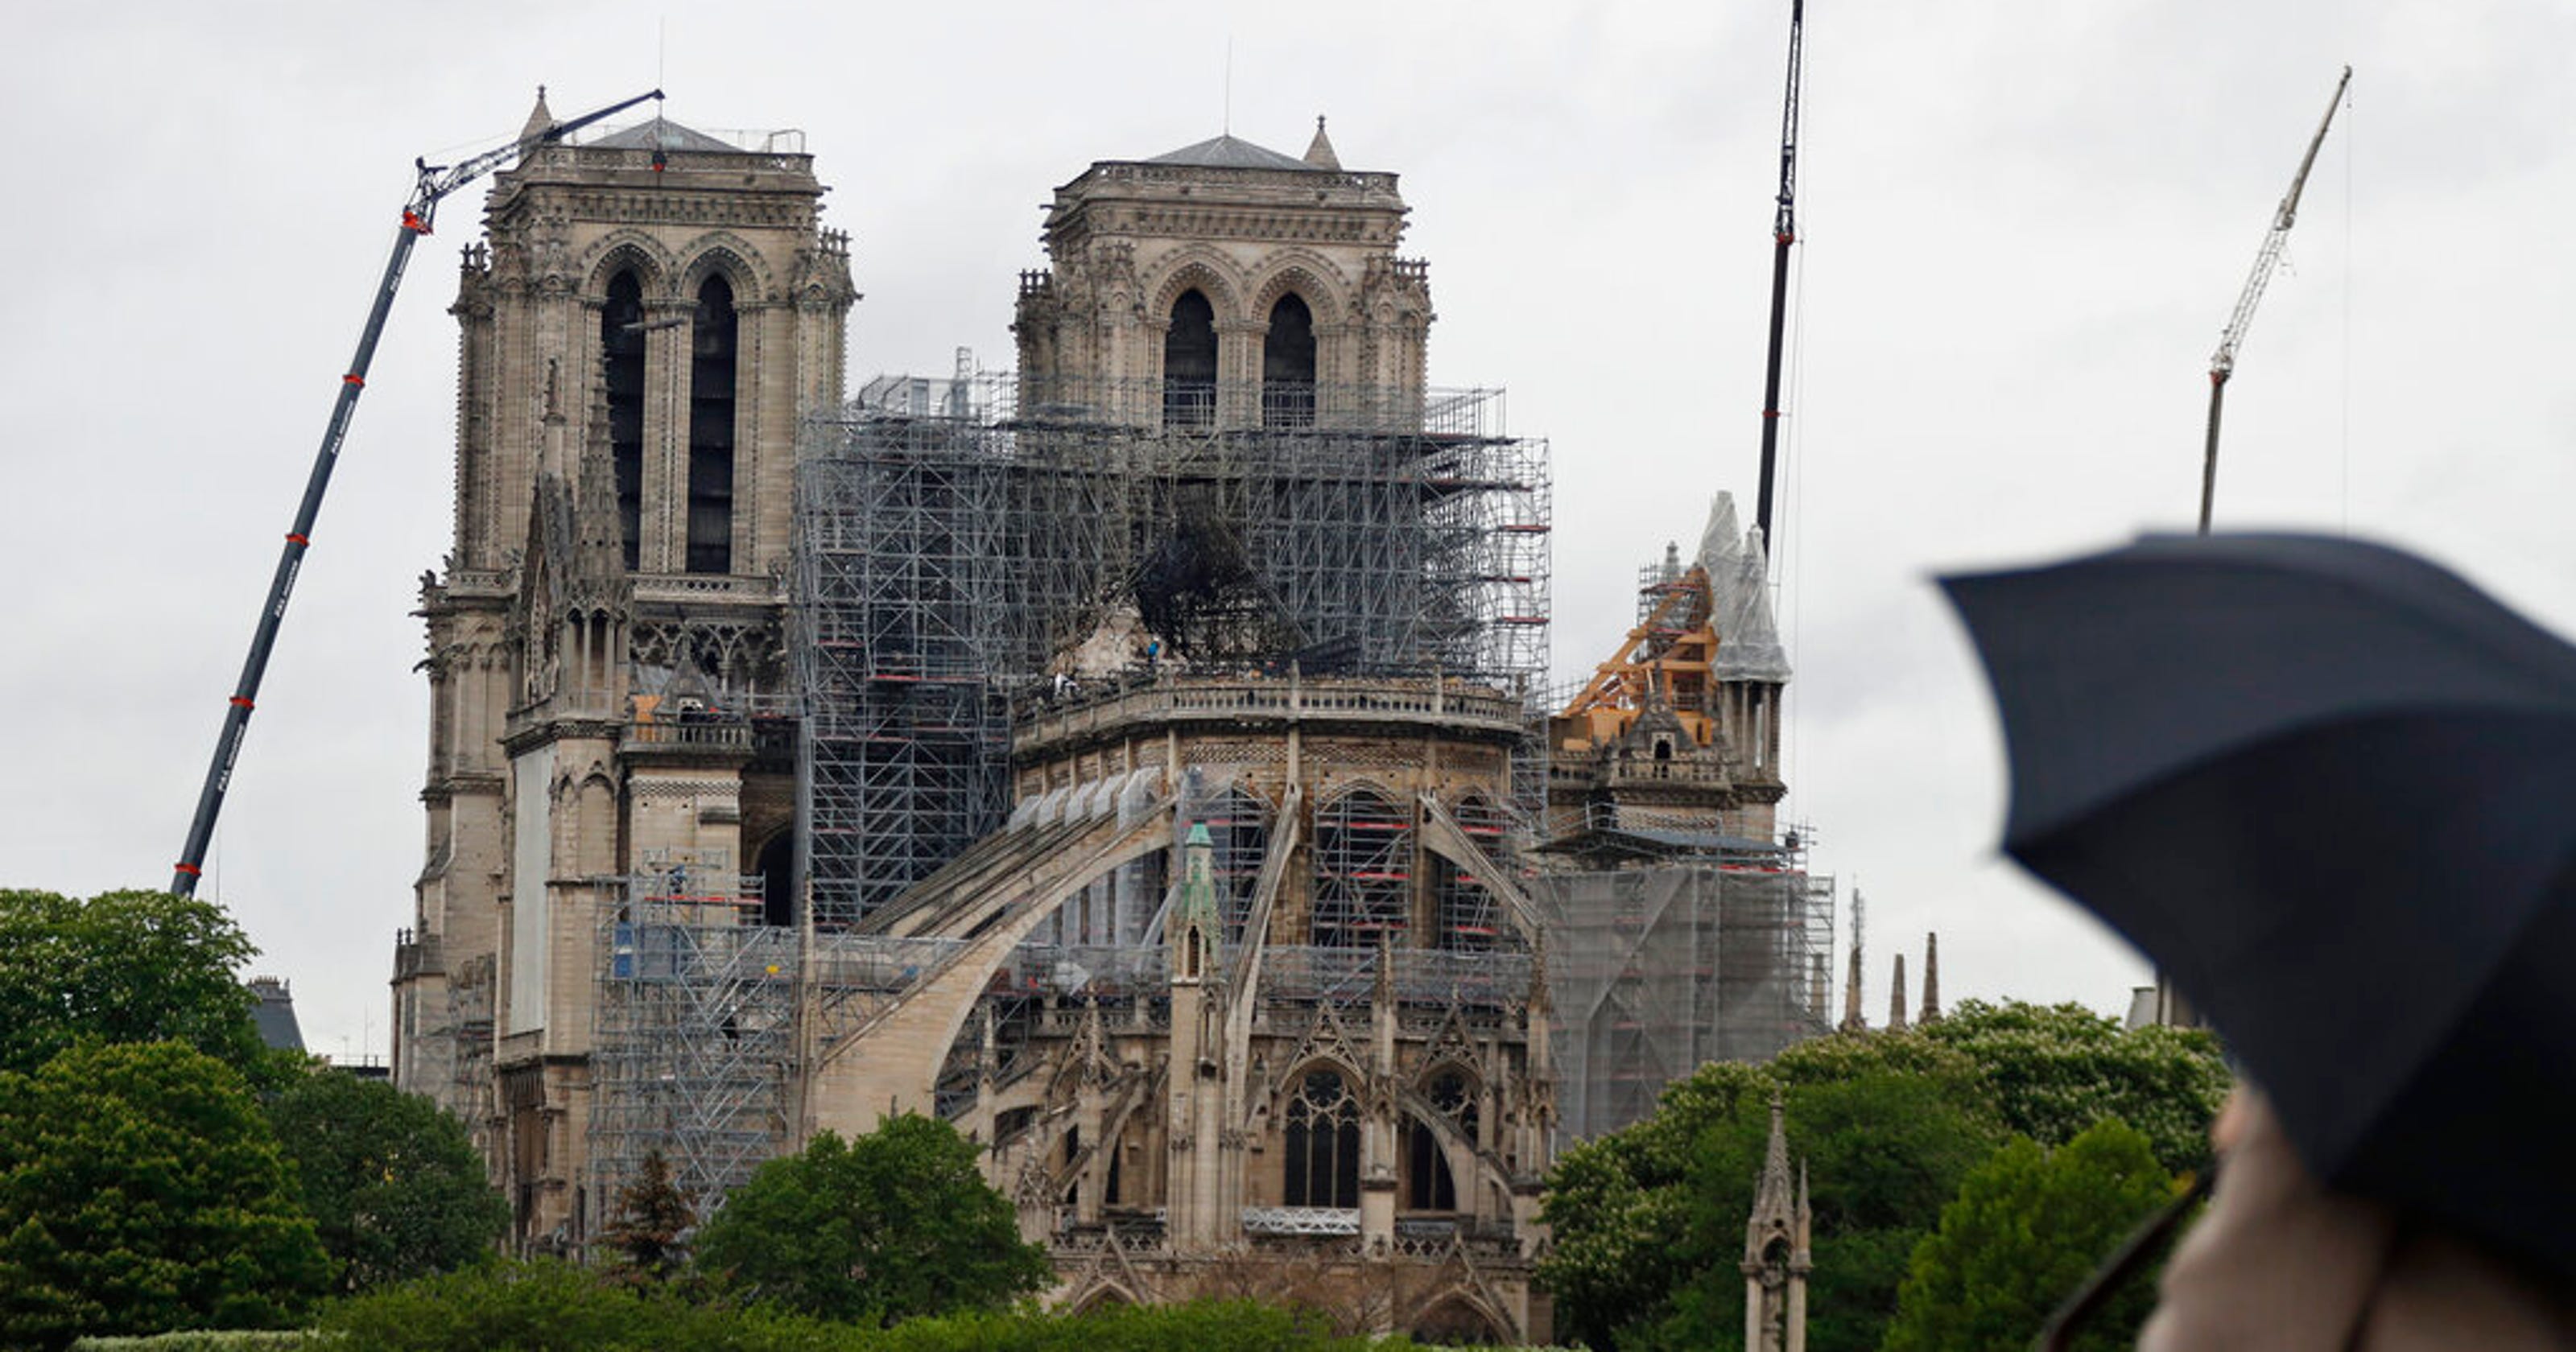 Fire-damaged Notre Dame cathedral in Paris still attracting tourists